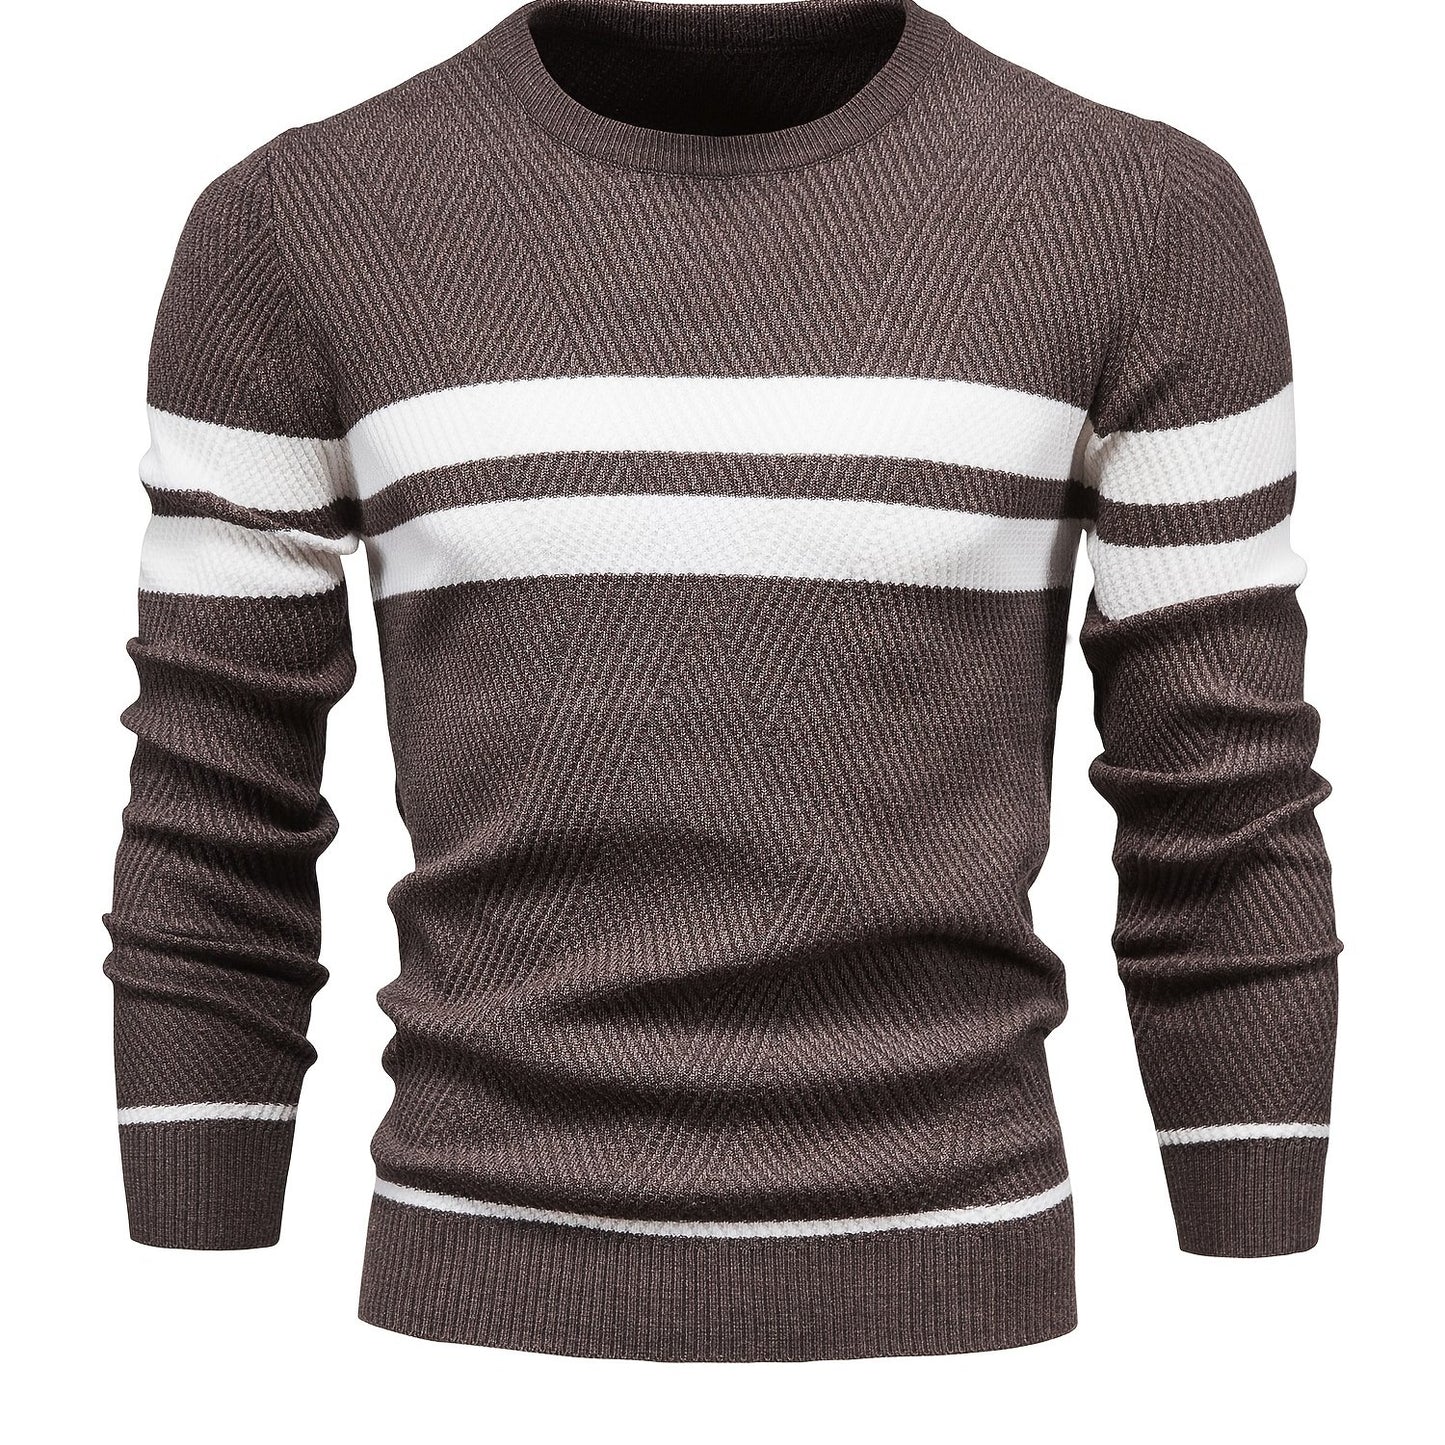 Foruwish - All Match Knitted Striped Pattern Sweater, Men's Casual Warm Slightly Stretch Crew Neck Pullover Sweater For Men Fall Winter